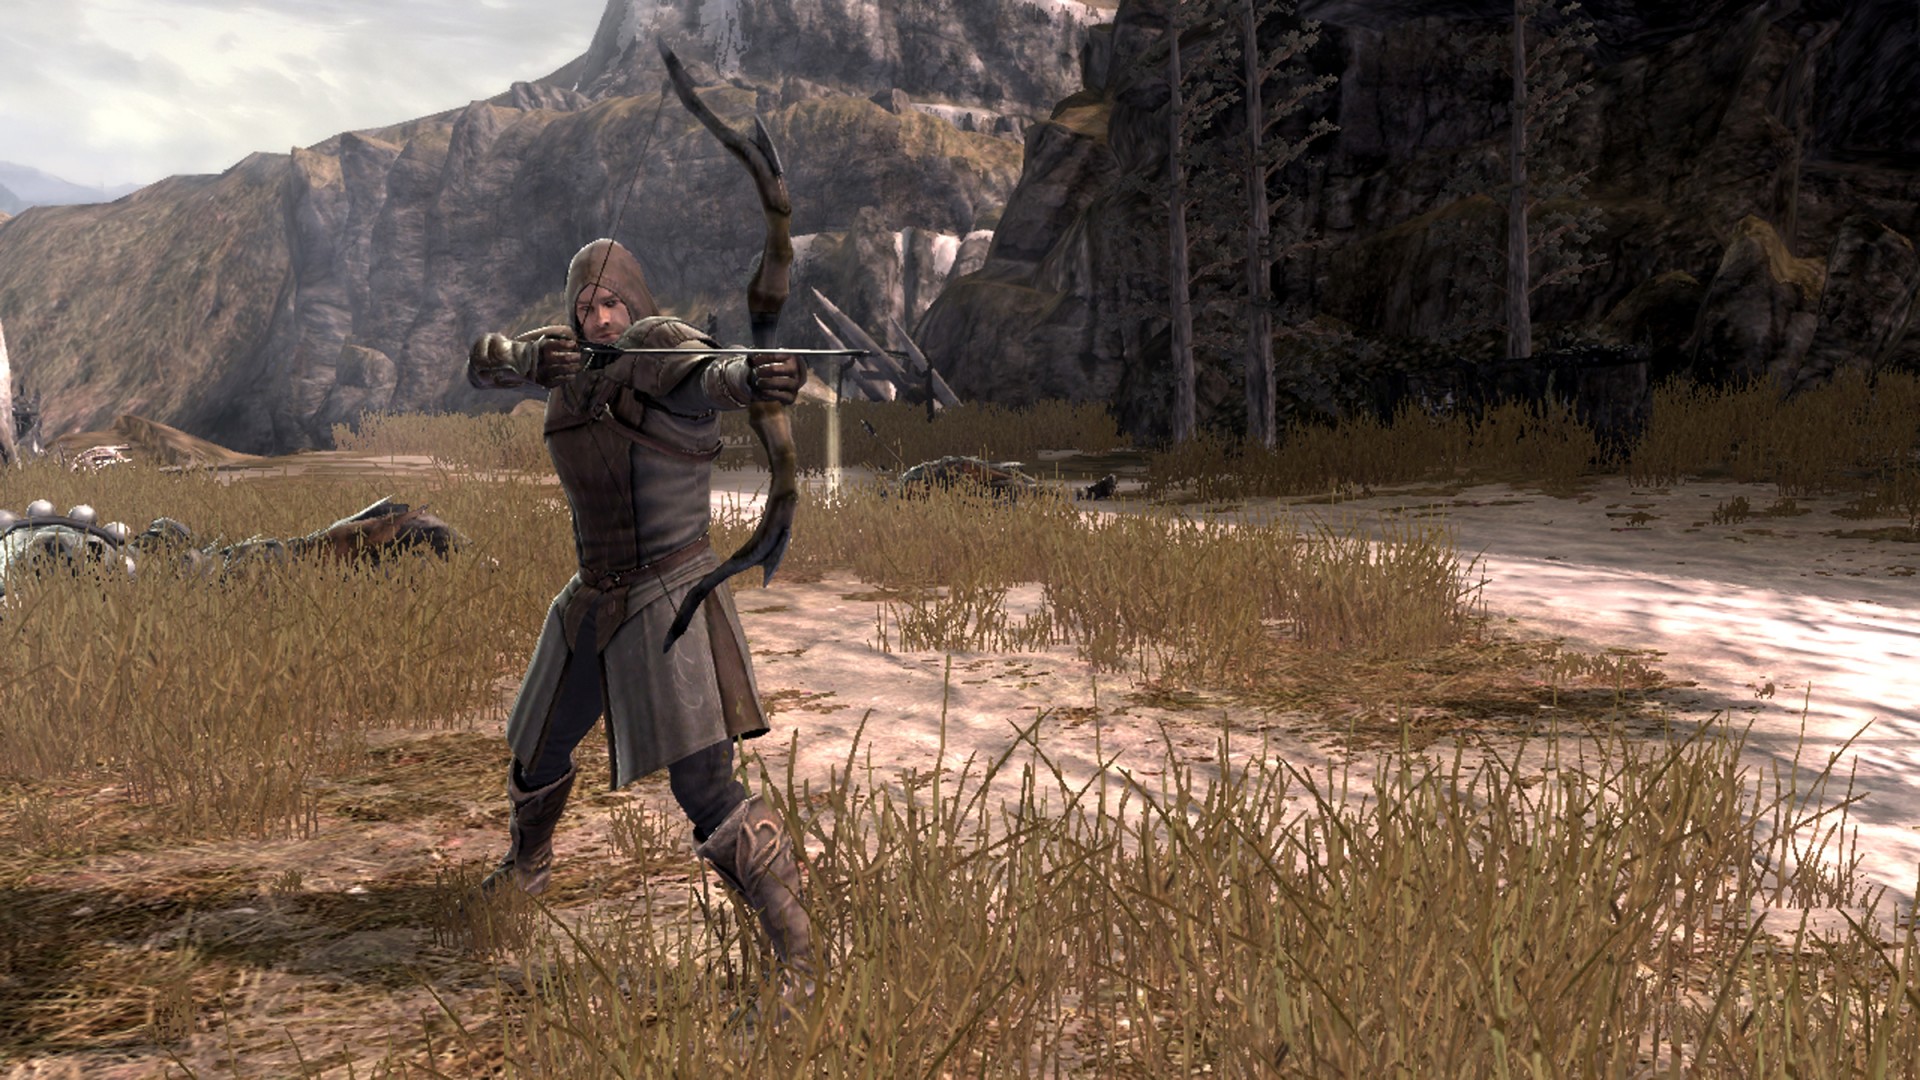 Lord of the Rings: War in the North screenshot